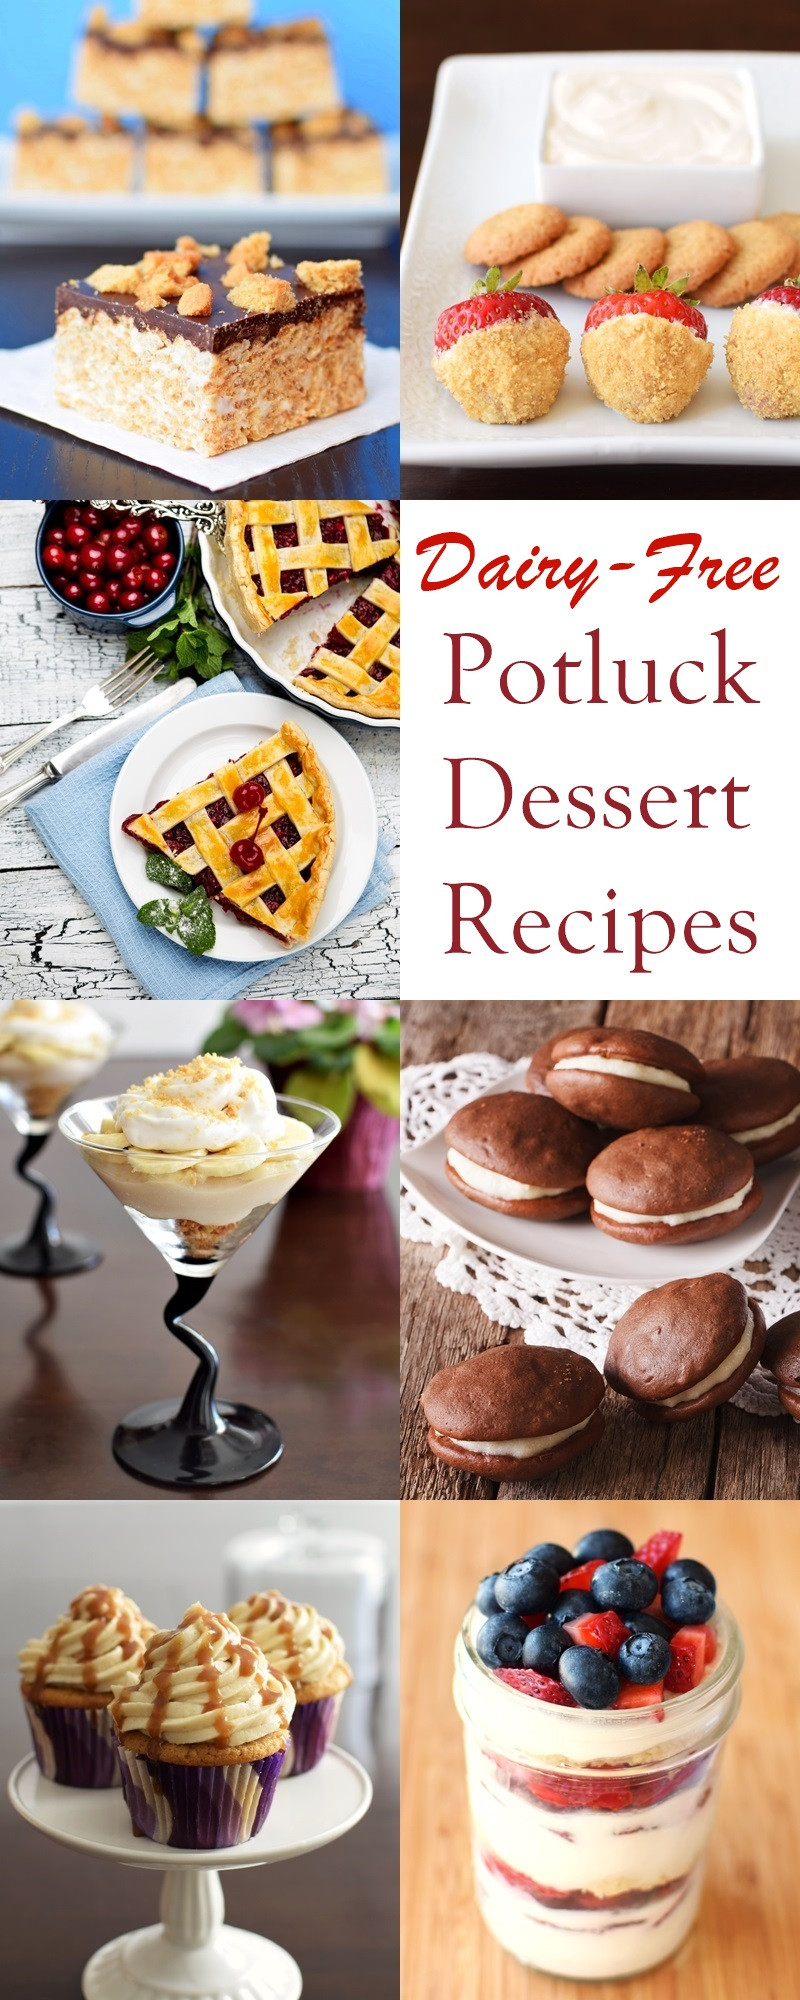 Soy Free Dairy Free Recipes
 22 Dairy Free Potluck Dessert Recipes Everyone Will Love